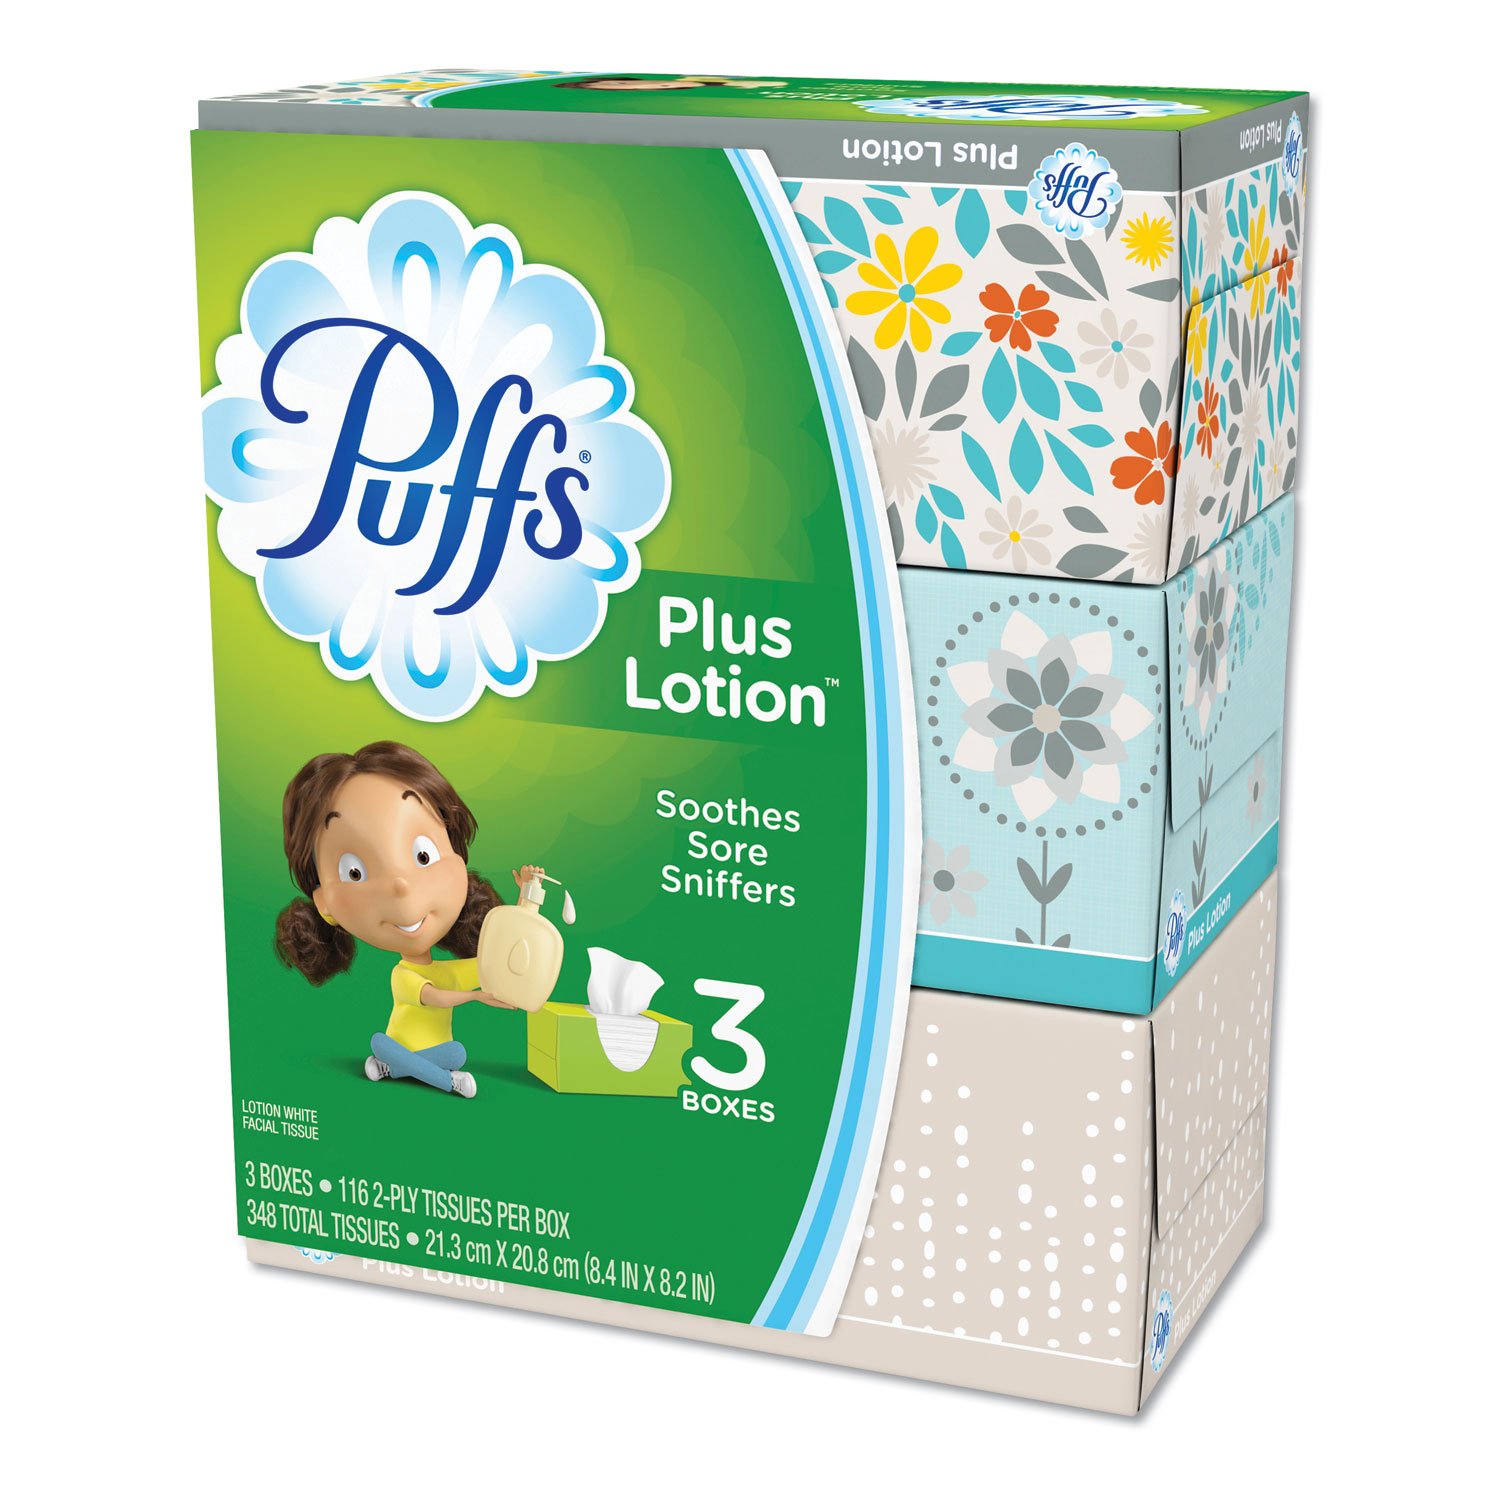 Puffs Plus Lotion Facial Tissue - 2-Ply, White, 116 Count, 8/Case